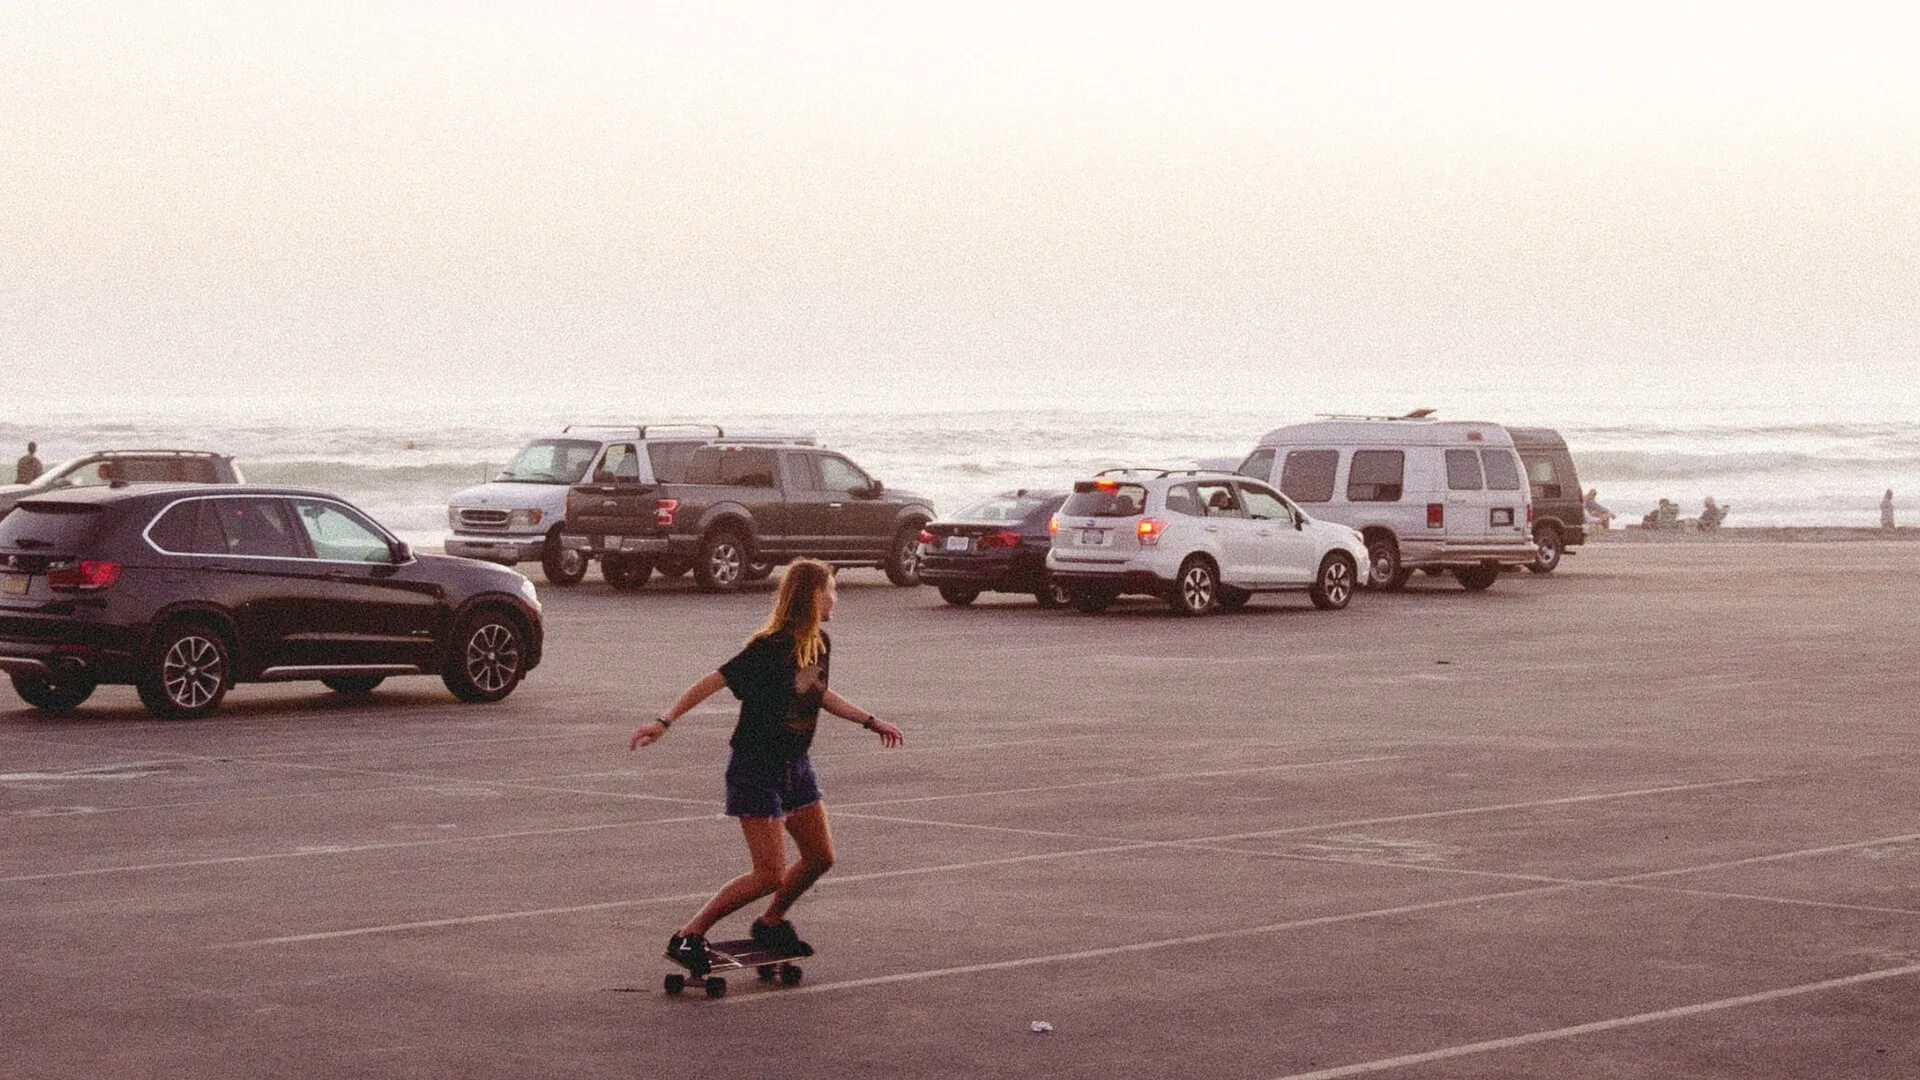 Top 5 spots to start your longboarding journey in the U.S.A